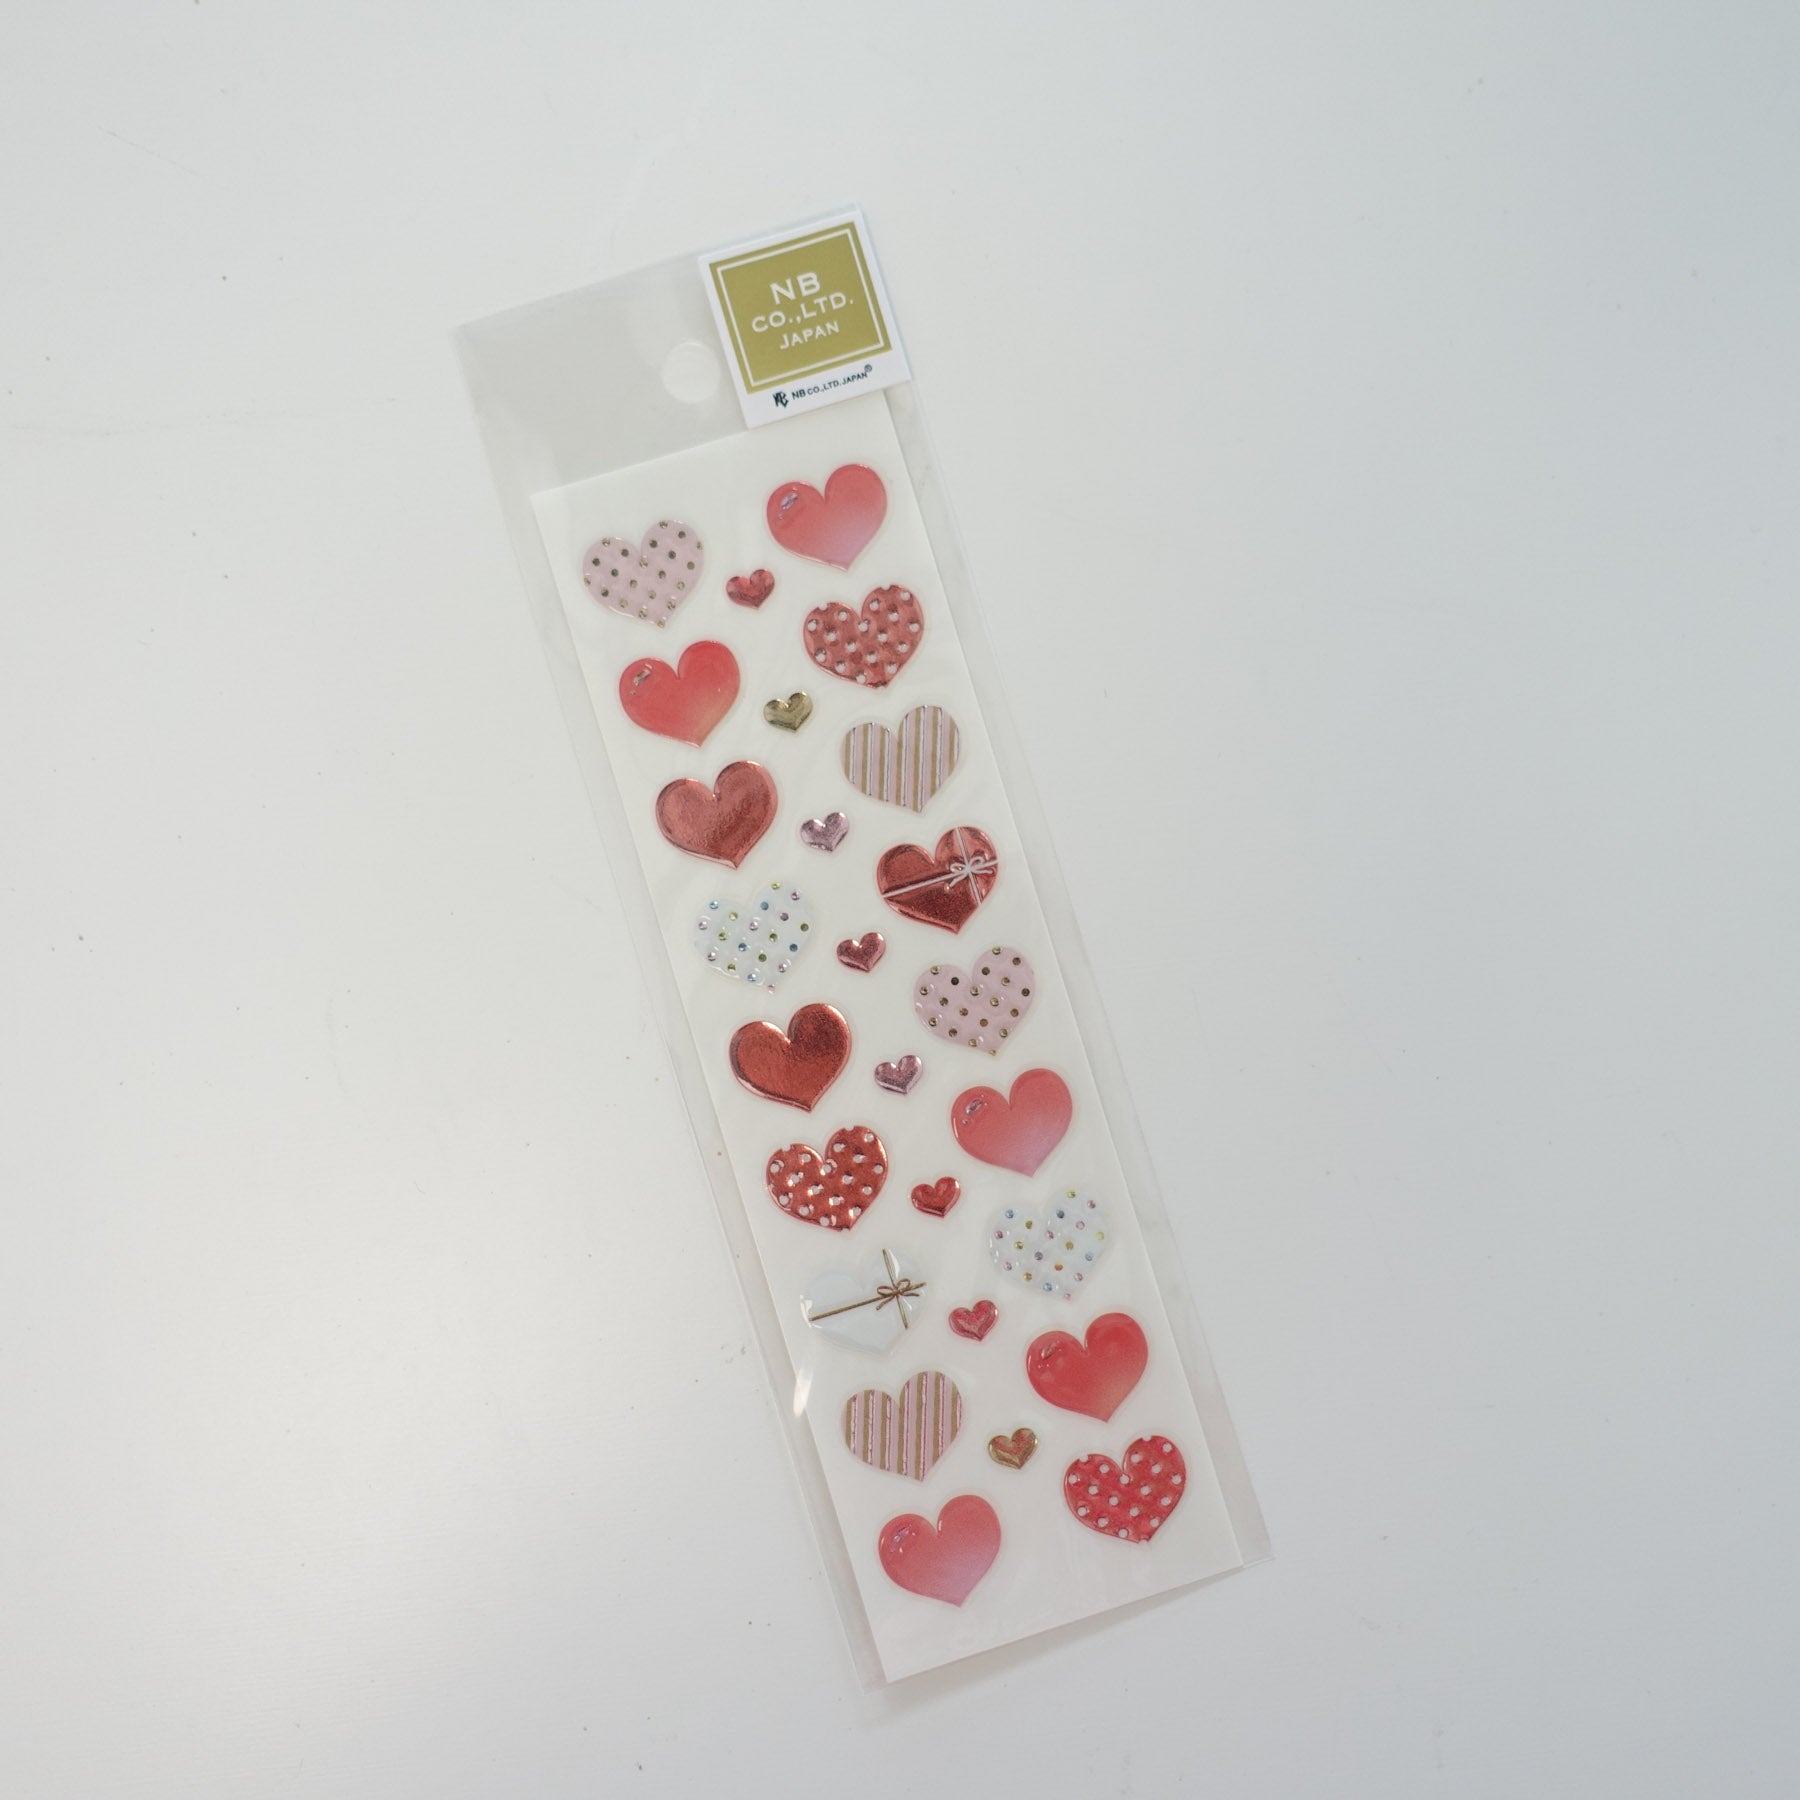 Assorted Polkadot Striped Love Hearts Clear-Backed Decorative Stickers Sheet